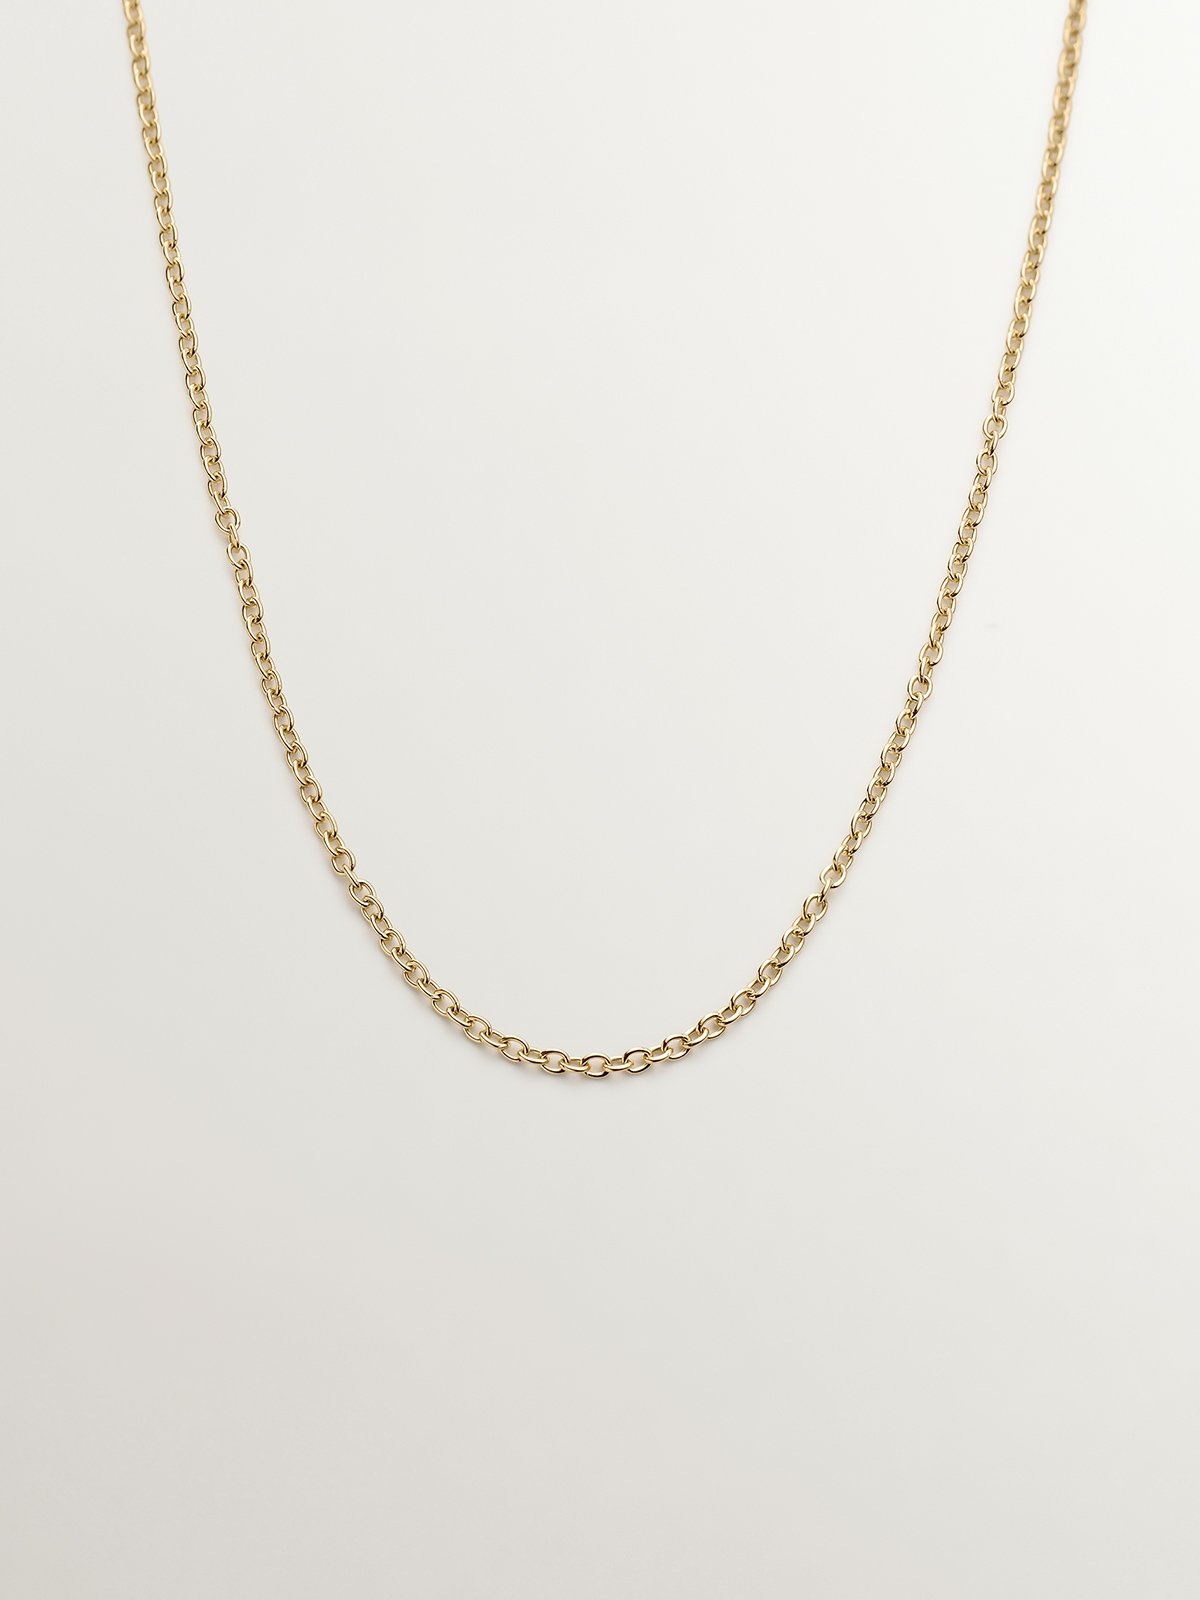 Fine rolo link chain in 9K yellow gold